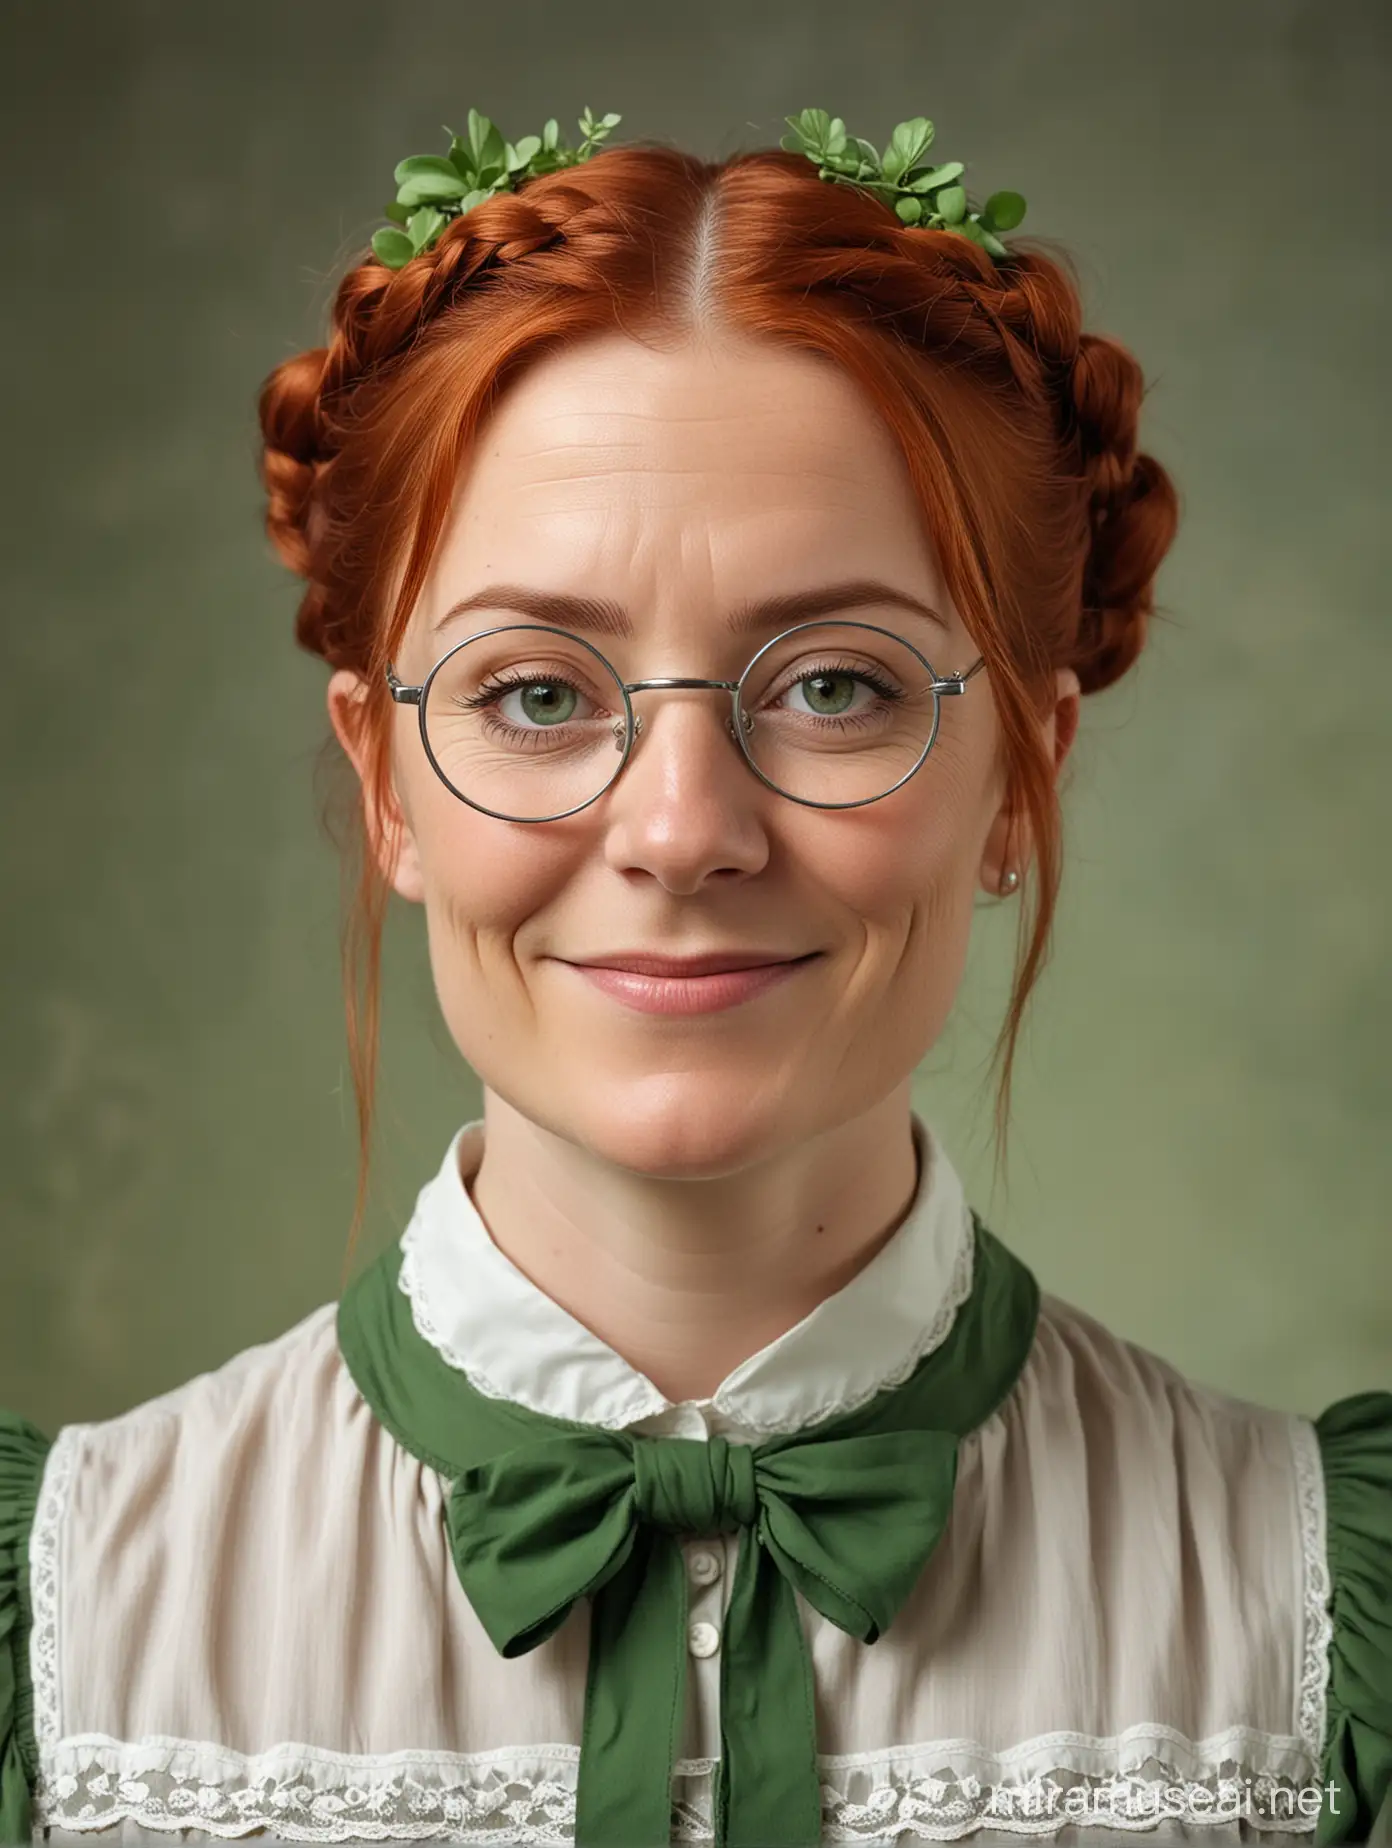 Late 19th Century Irish Botanist with Braided Red Hair and Silver Spectacles